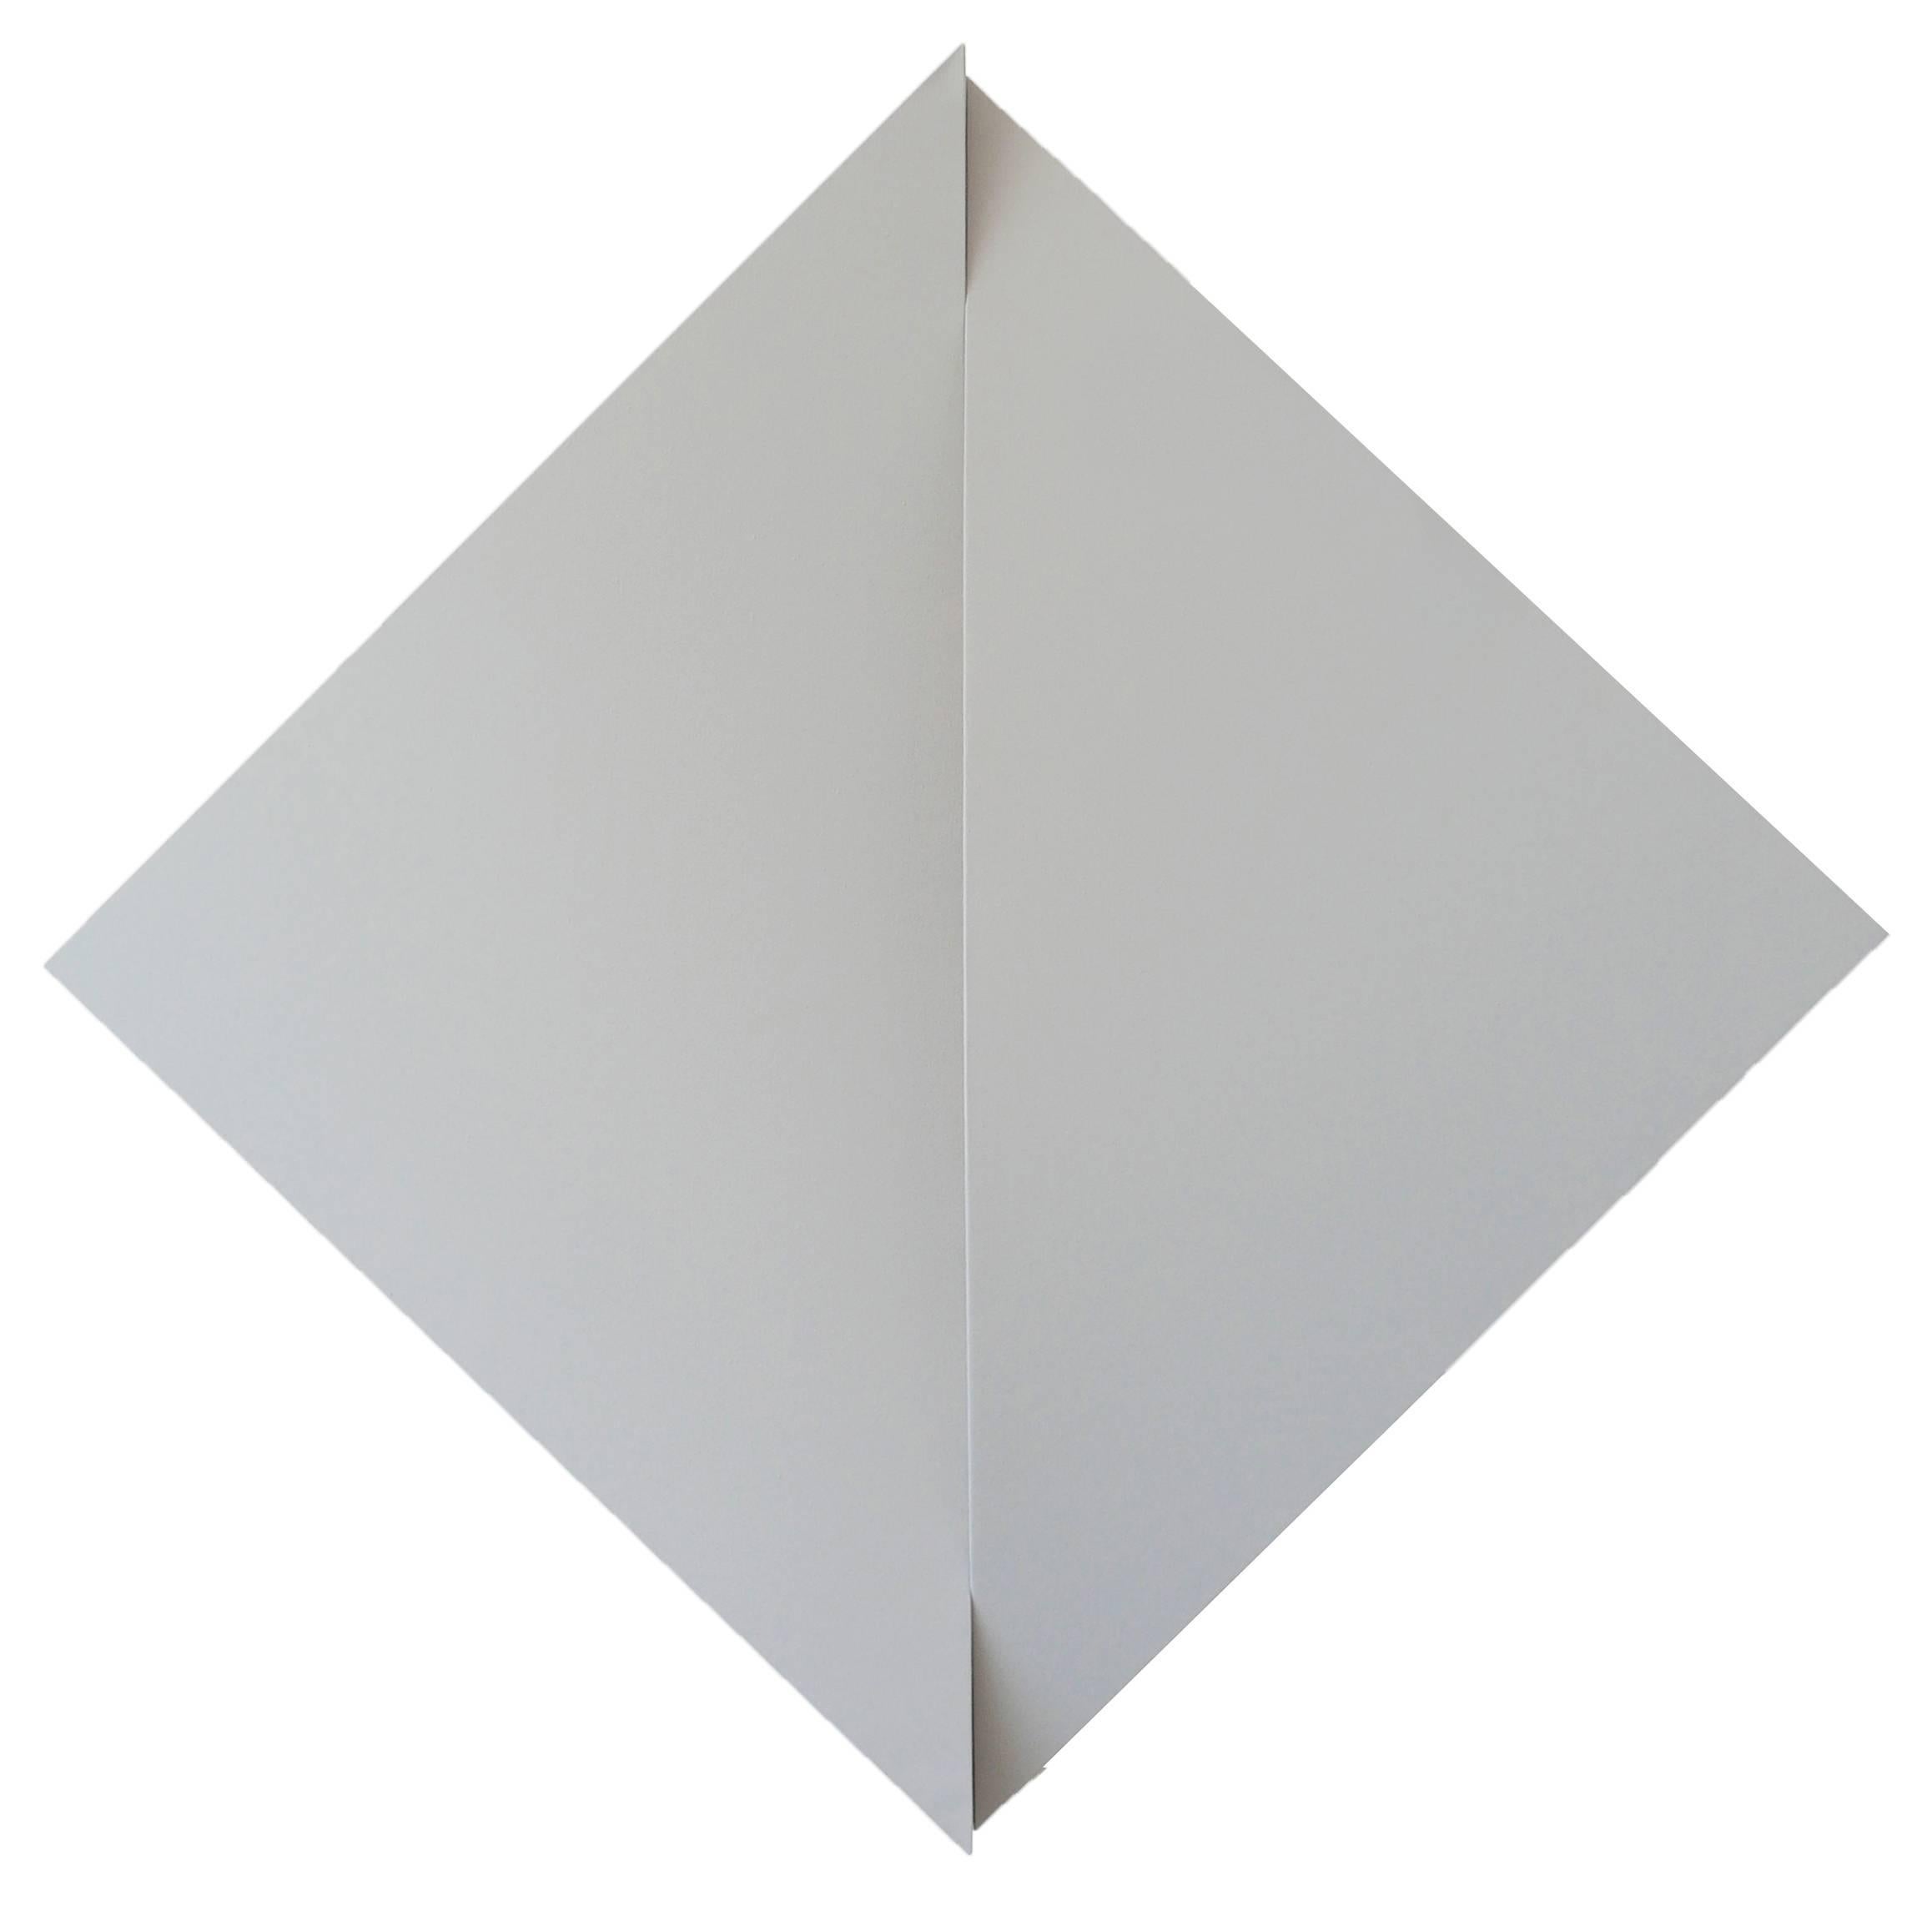 Jan Maarten Voskuil Abstract Painting – Non-Fit Triangles I (grey)